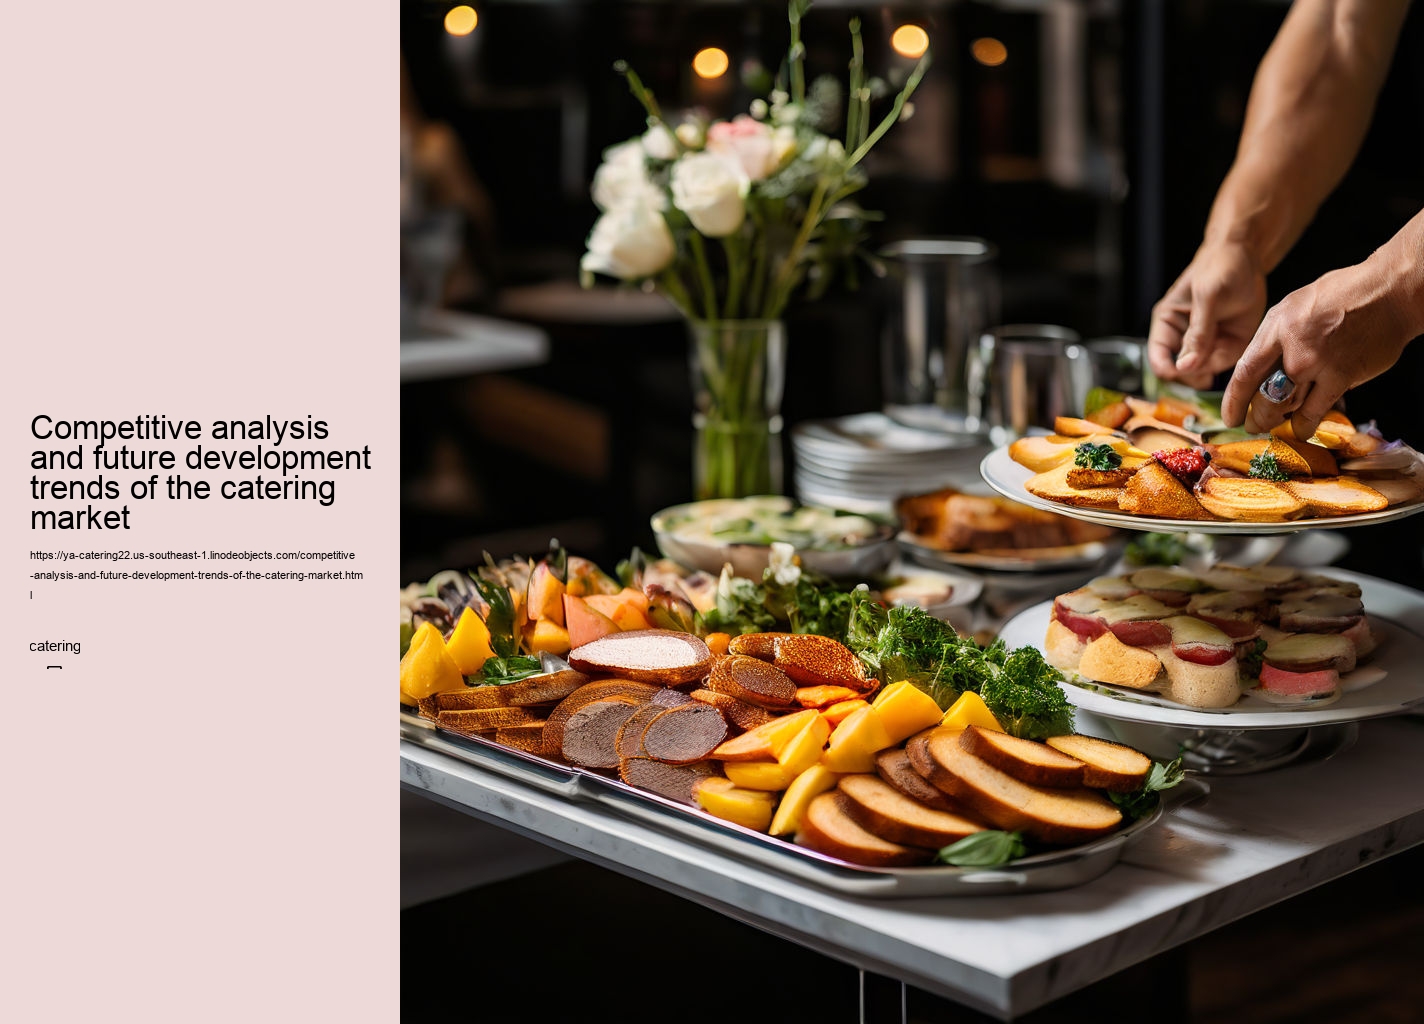 Competitive analysis and future development trends of the catering market